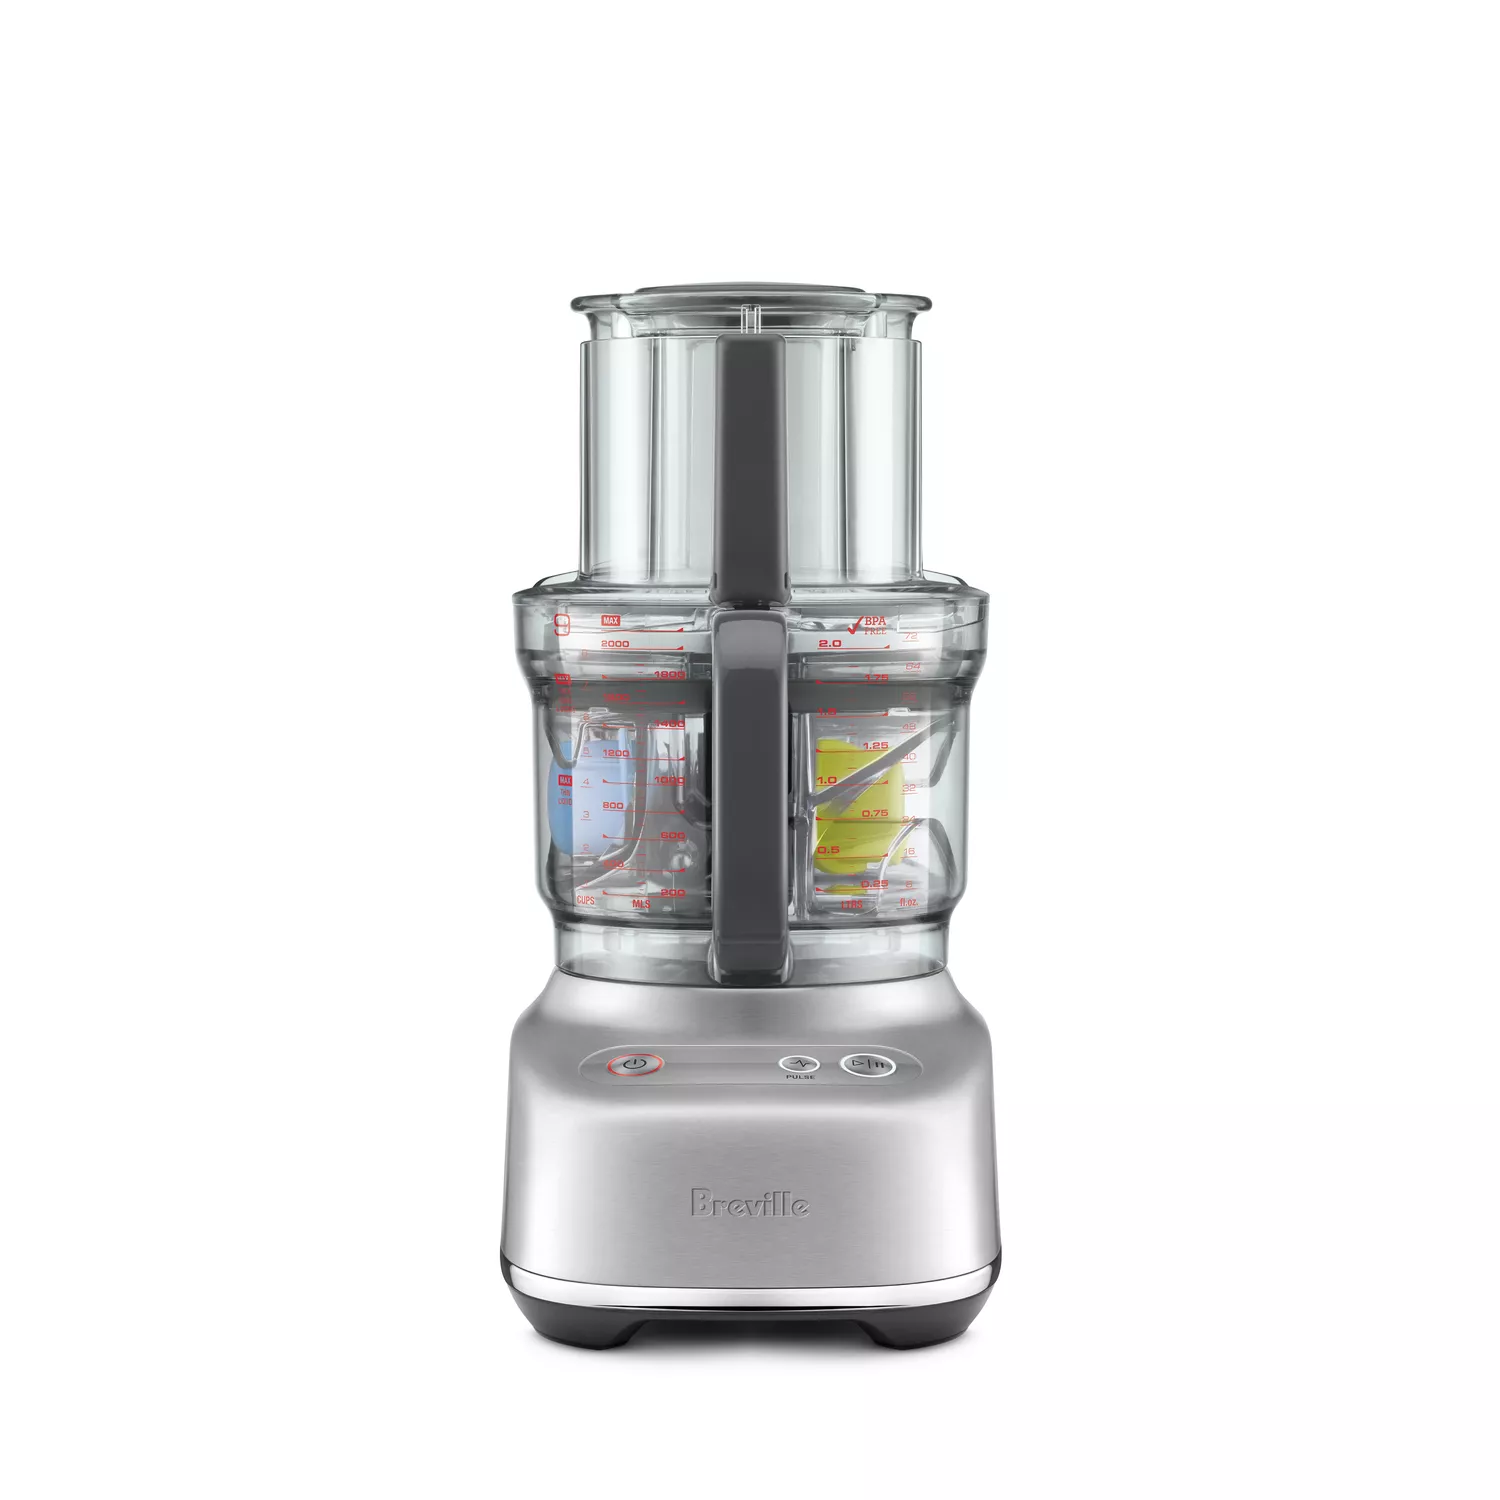 Breville Sous Chef 9-Cup Food Processor